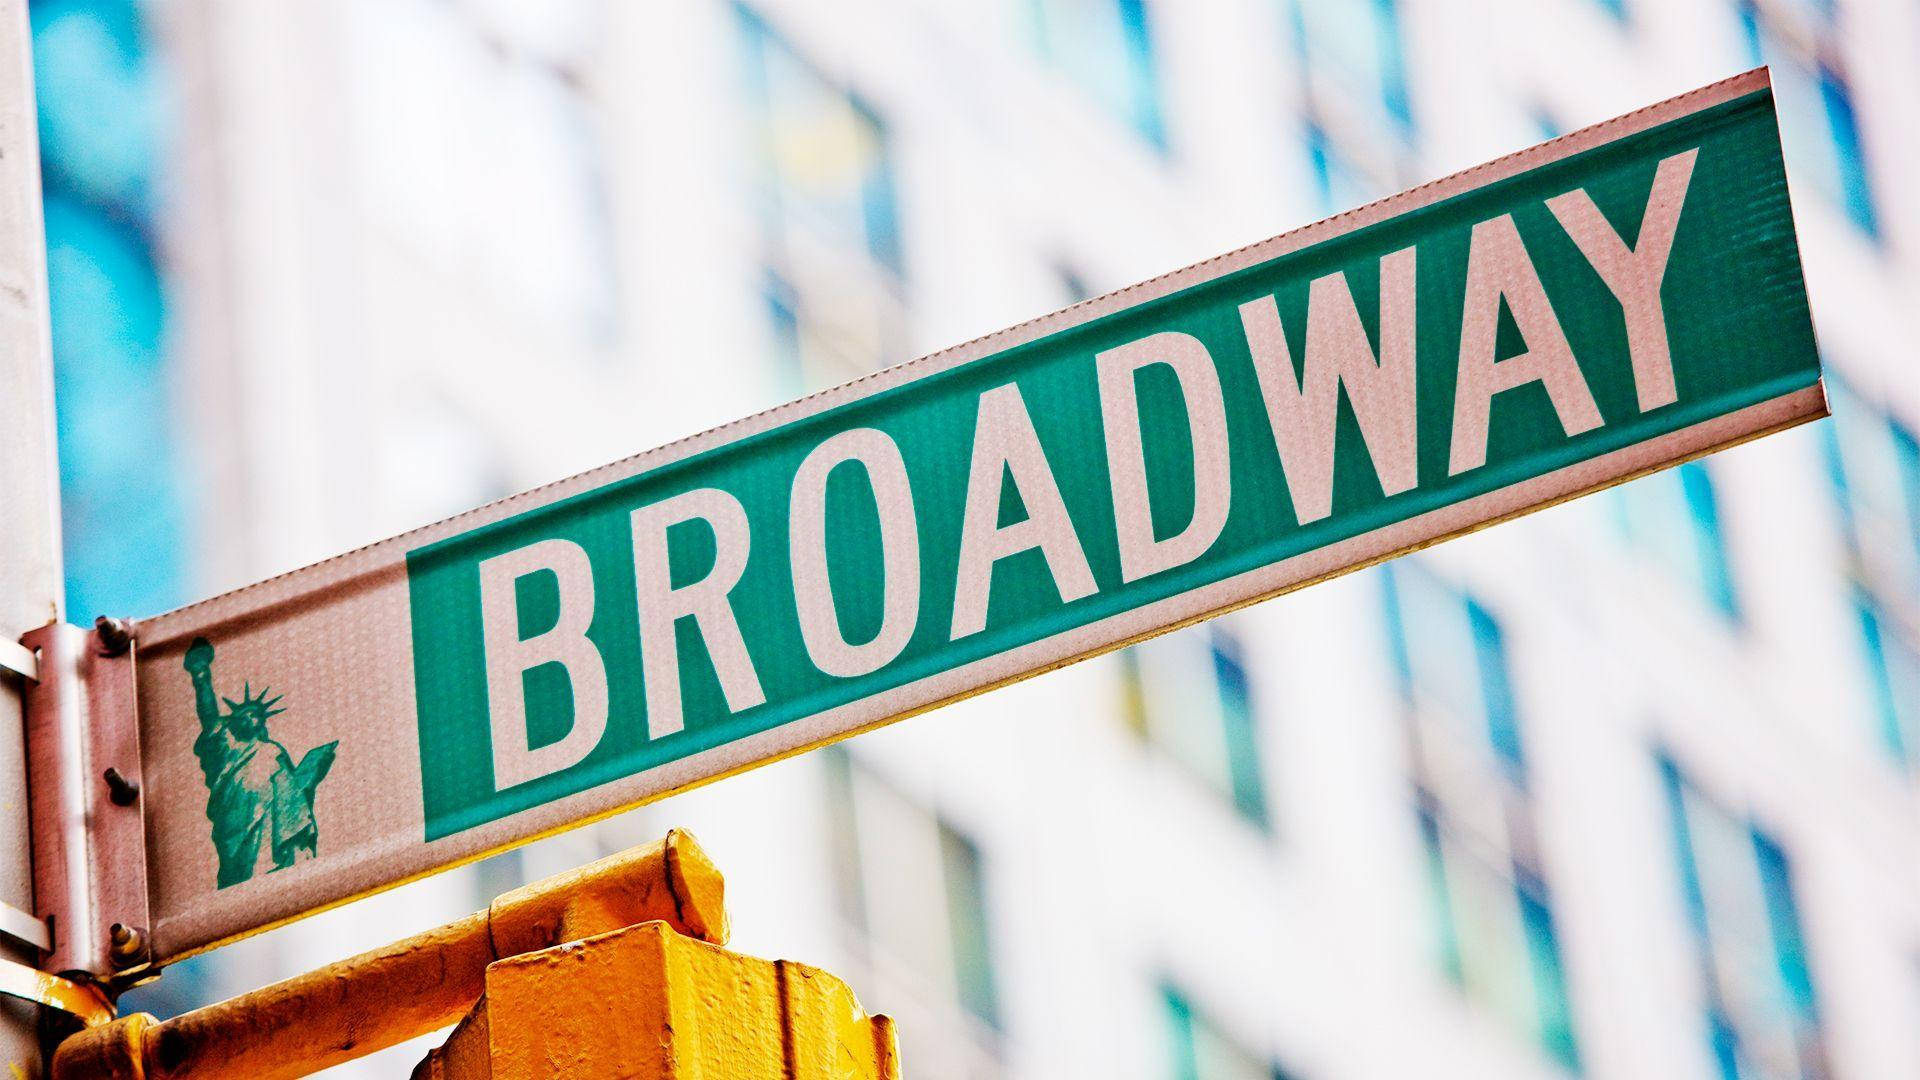 Feel The Power Of Theater - Experience A Broadway Show Background